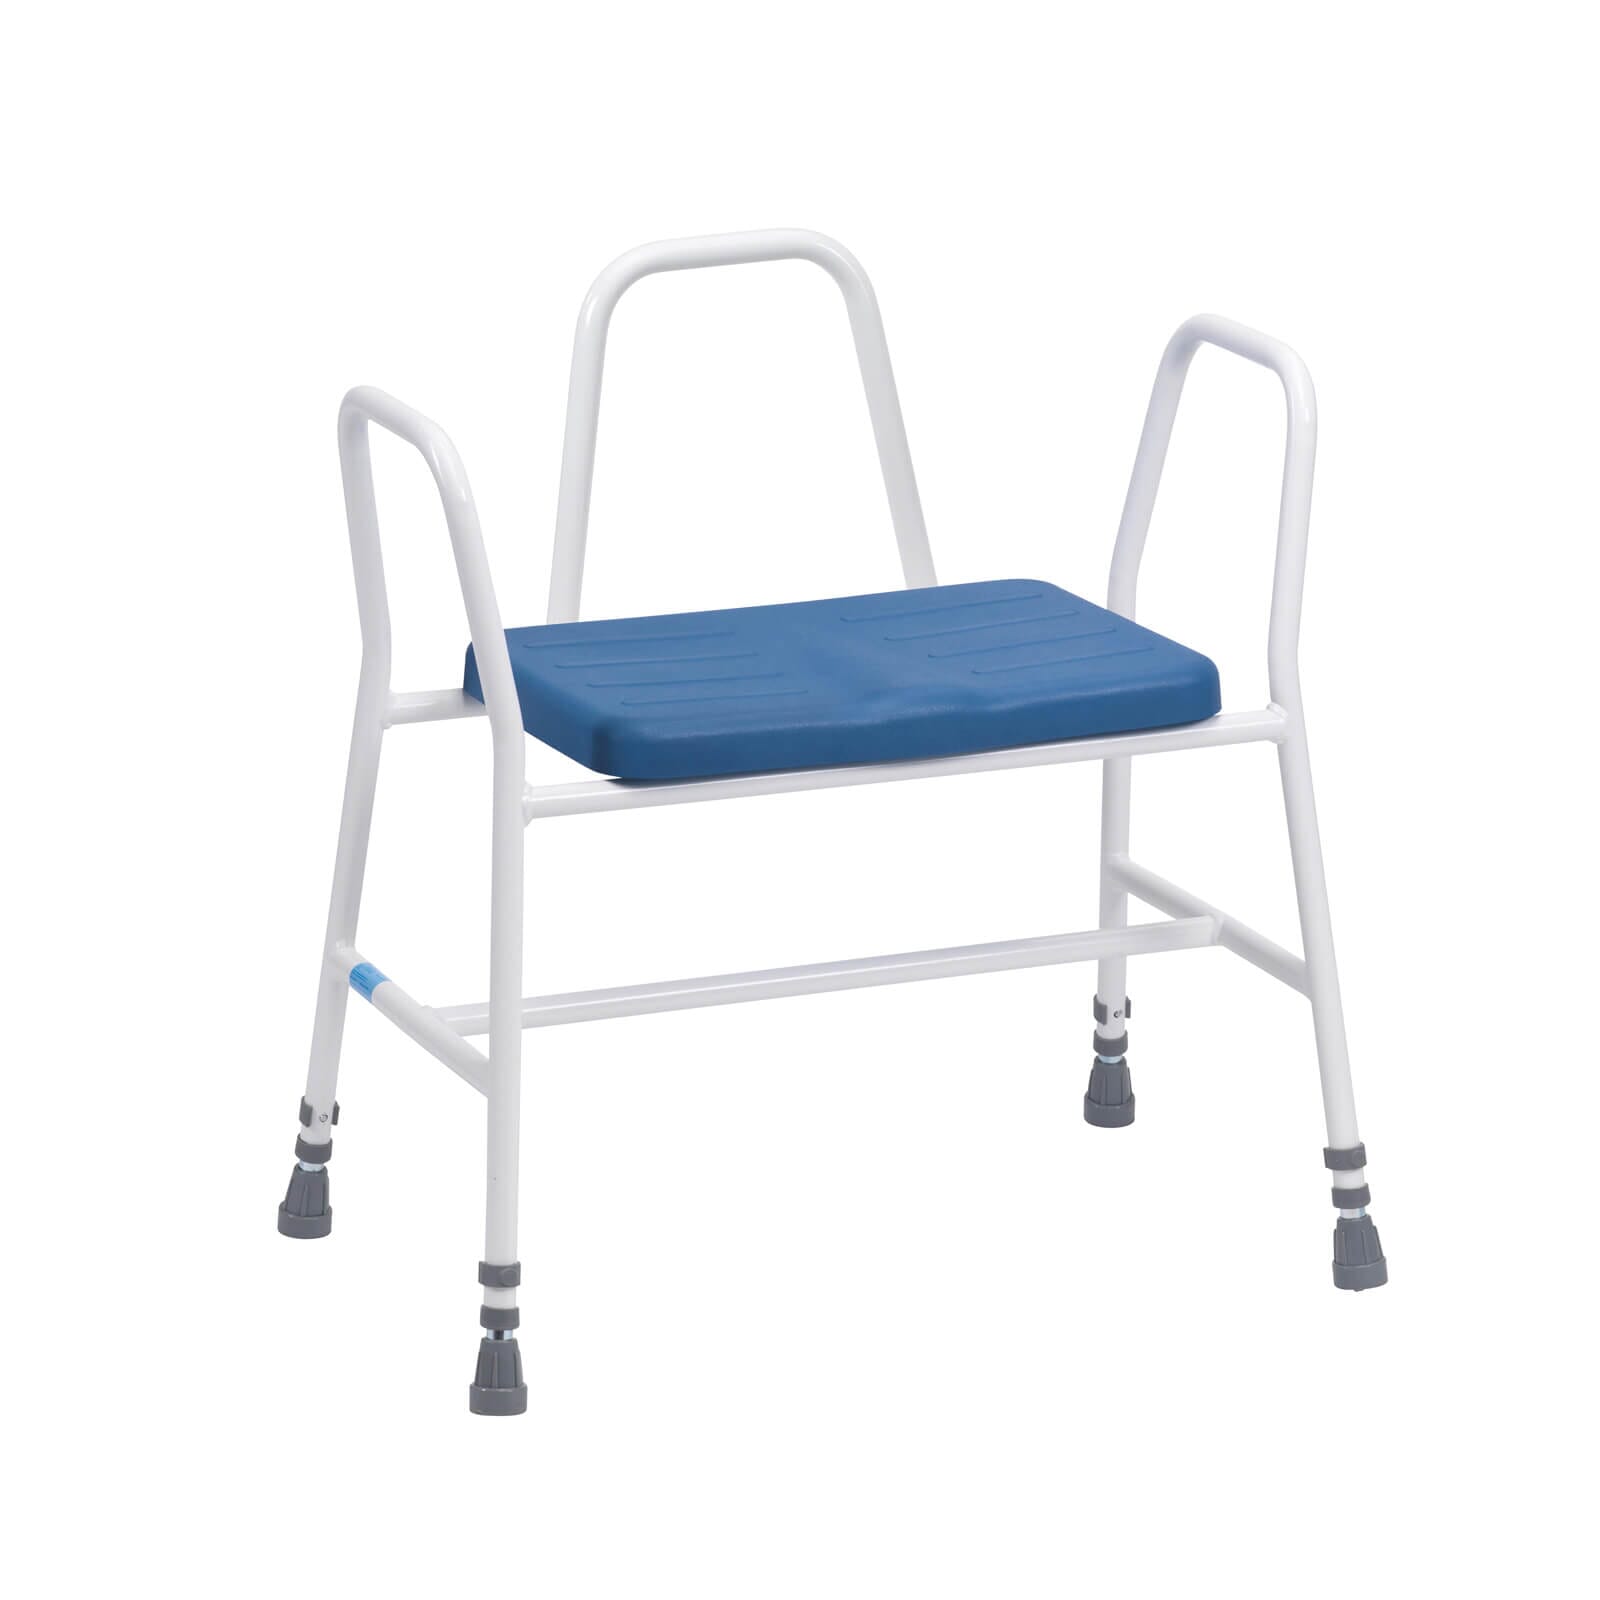 View PU Bariatric Perching Kitchen Stool Tubular Arms and Back information